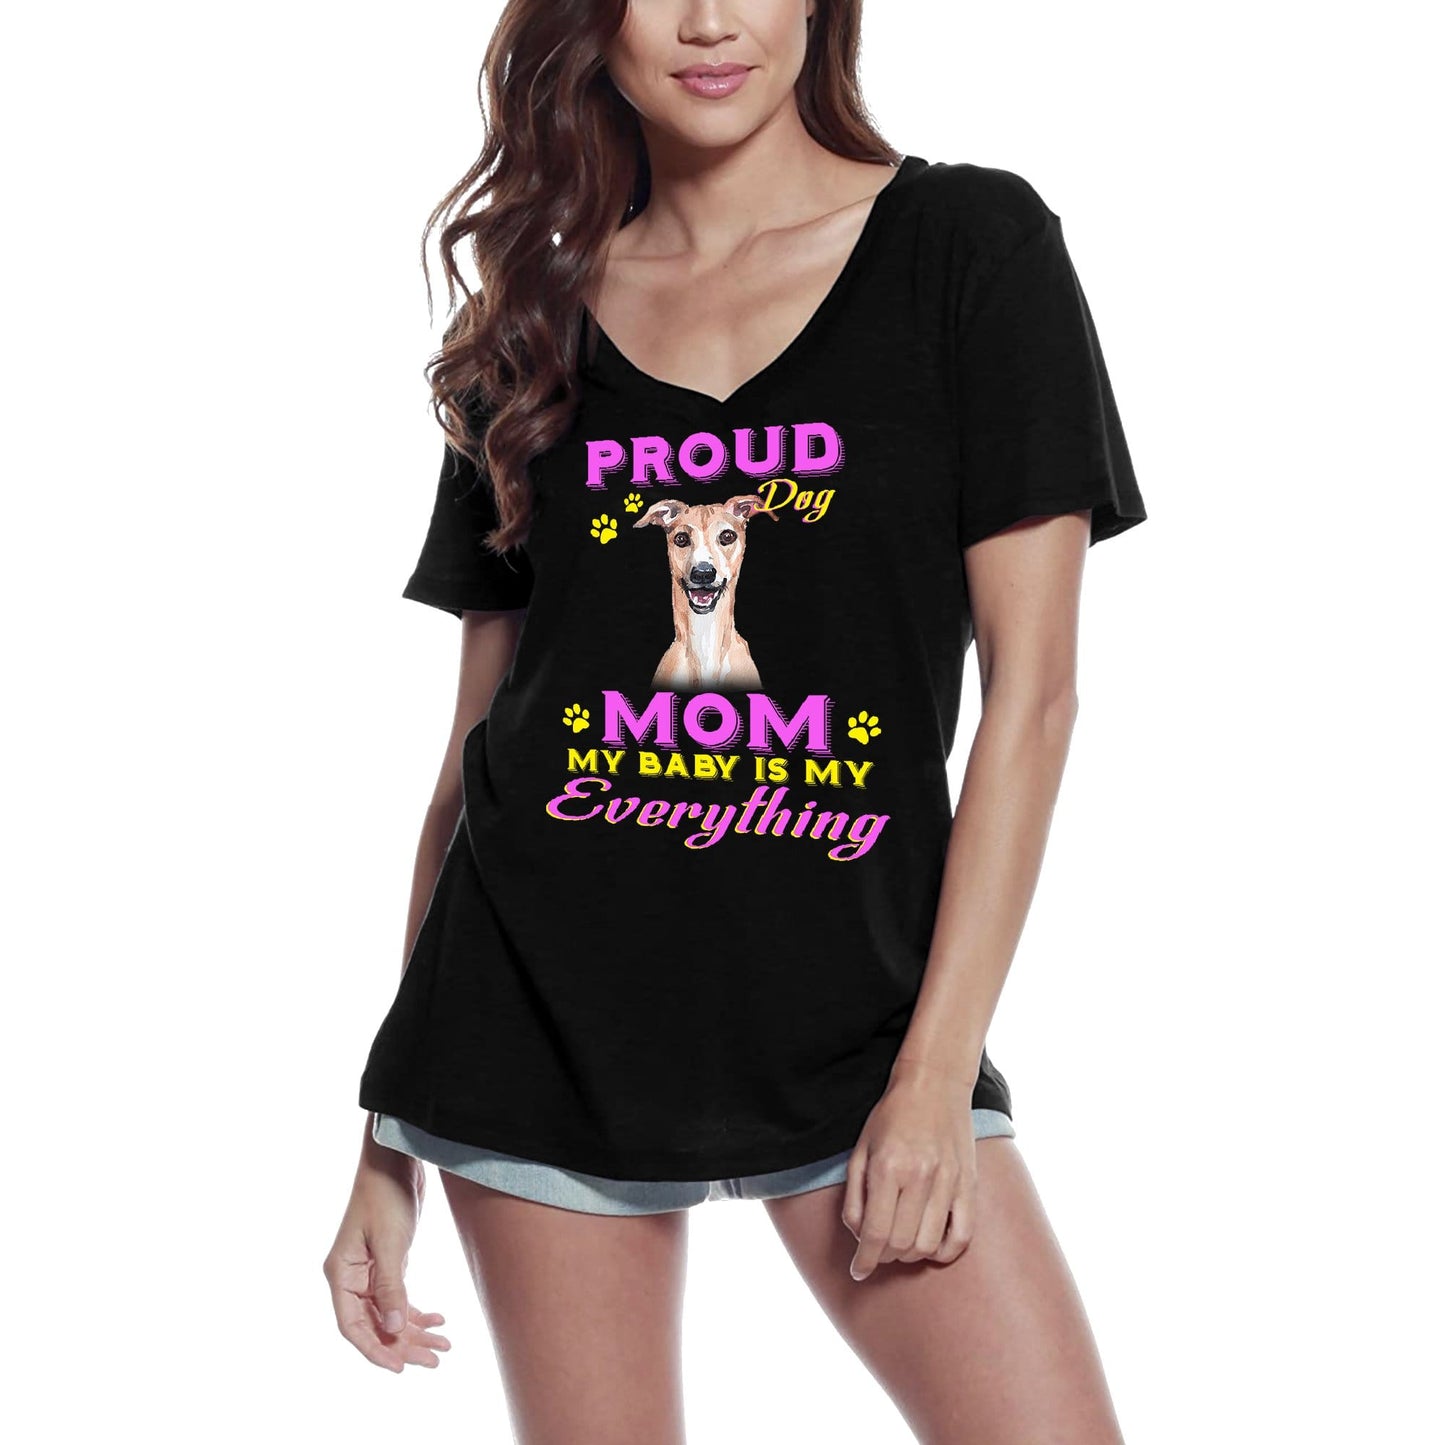 ULTRABASIC Women's T-Shirt Proud Day - Whippet Dog Mom - My Baby is My Everything